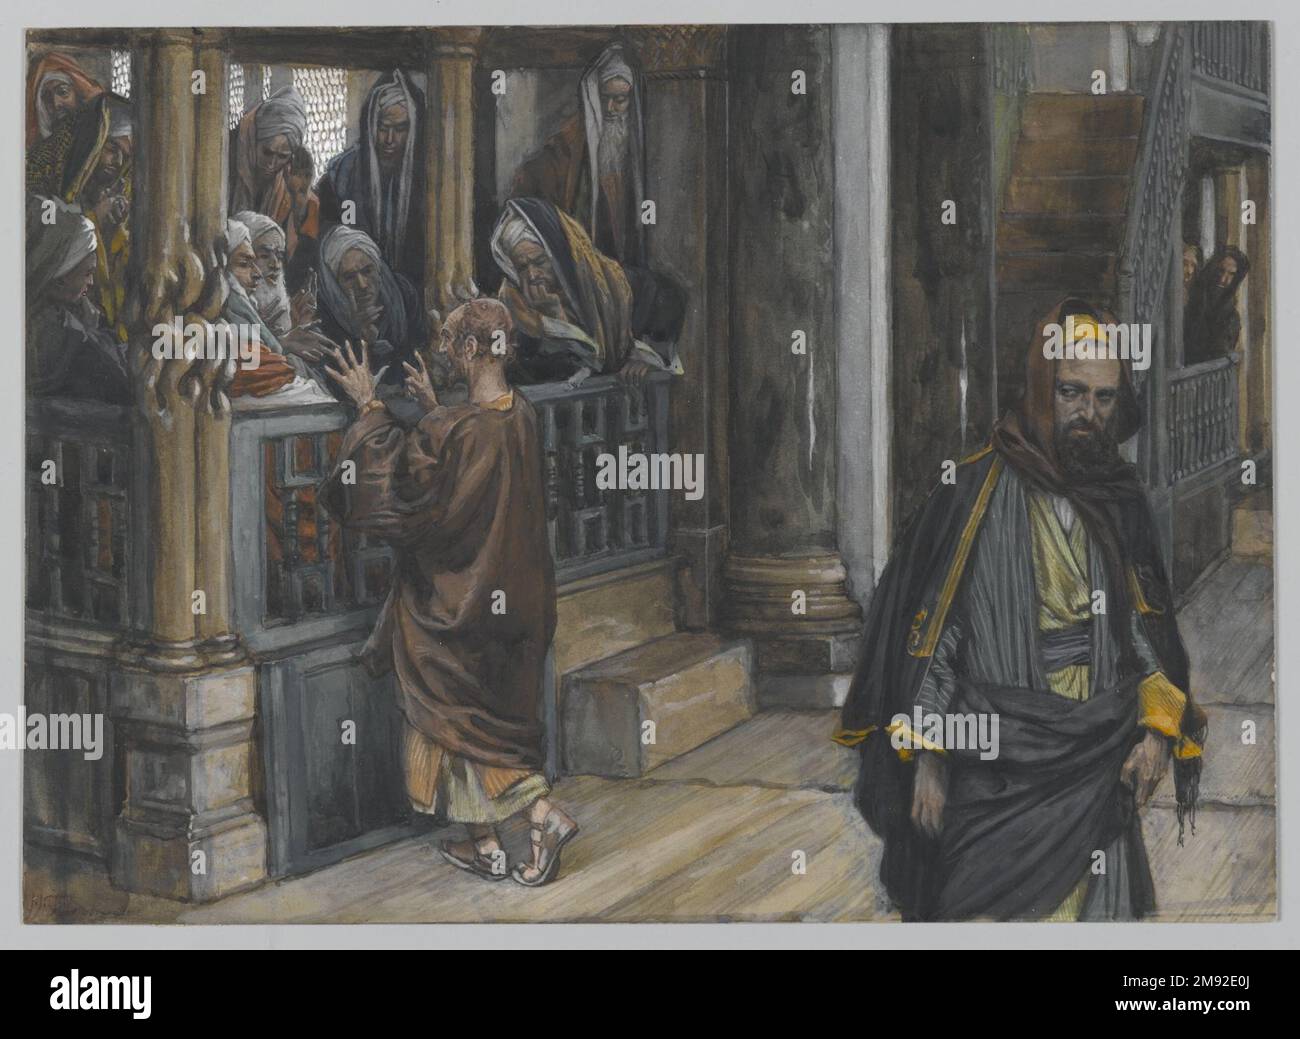 Judas Goes to Find the Jews (Judas va trouver les Juifs) James Tissot (French, 1836-1902). , 1886-1894. Opaque watercolor over graphite on gray wove paper, Image: 7 3/16 x 10 in. (18.3 x 25.4 cm).  In two short verses, Mark recounts the deal struck between Judas and the chief priests, who will give him money to betray Jesus. Here, Judas negotiates his fee (he is shown with his fingers raised). With his suspicious backward glance at the exchange between Judas and the priests, the unidentified foreground figure draws the viewer’s attention to the proceedings. European Art 1886-1894 Stock Photo